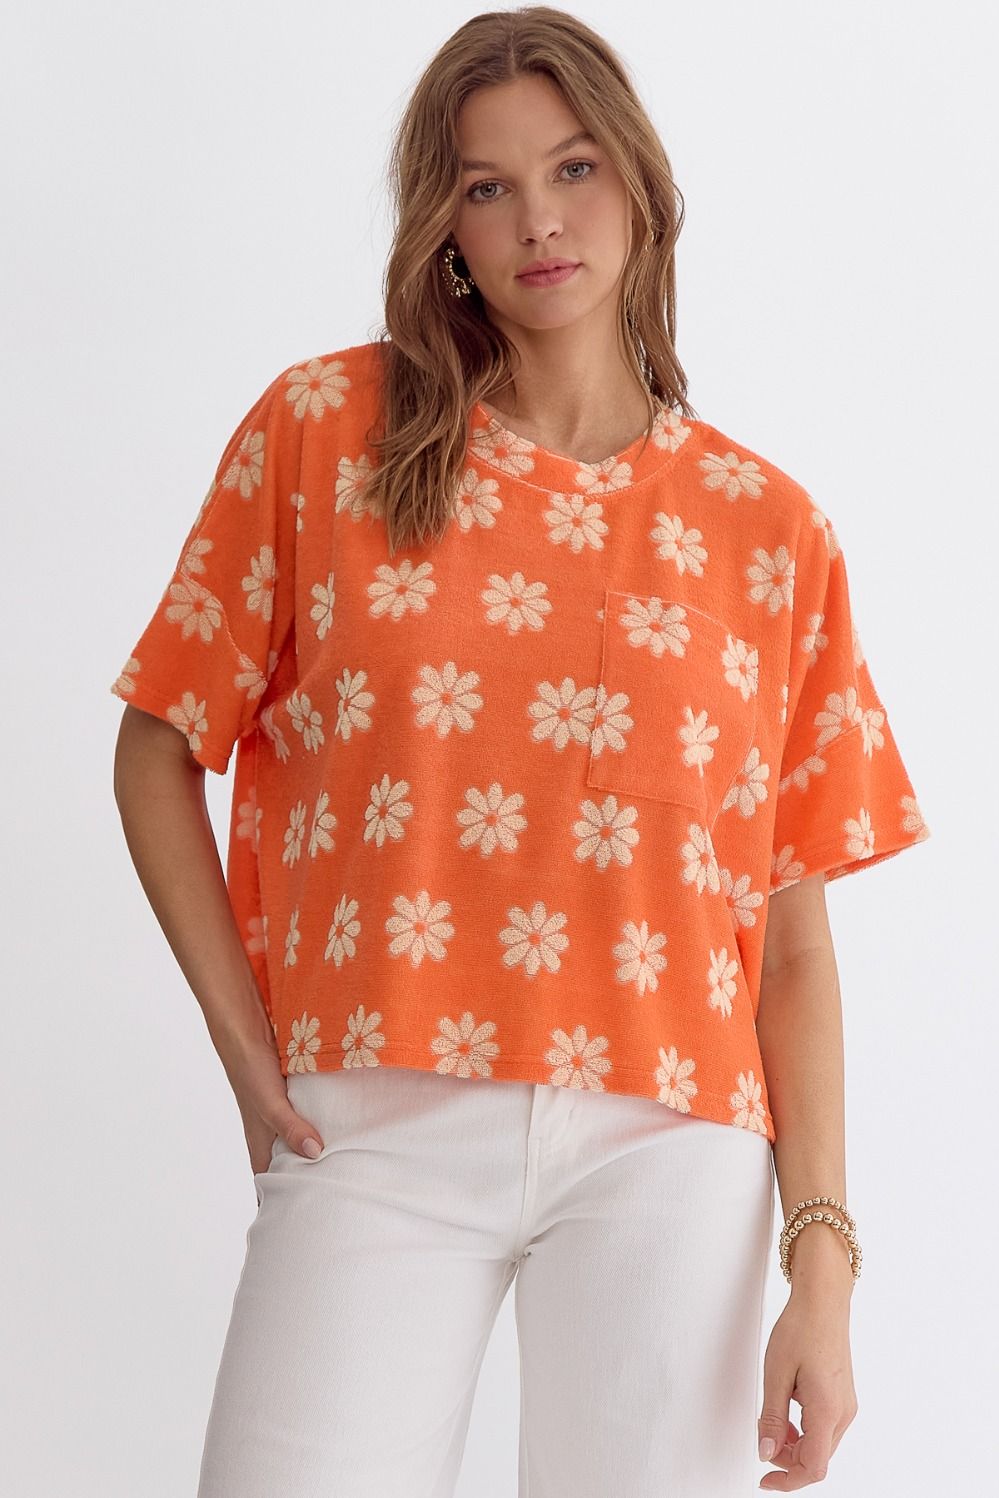 Floral Terry Cloth Top